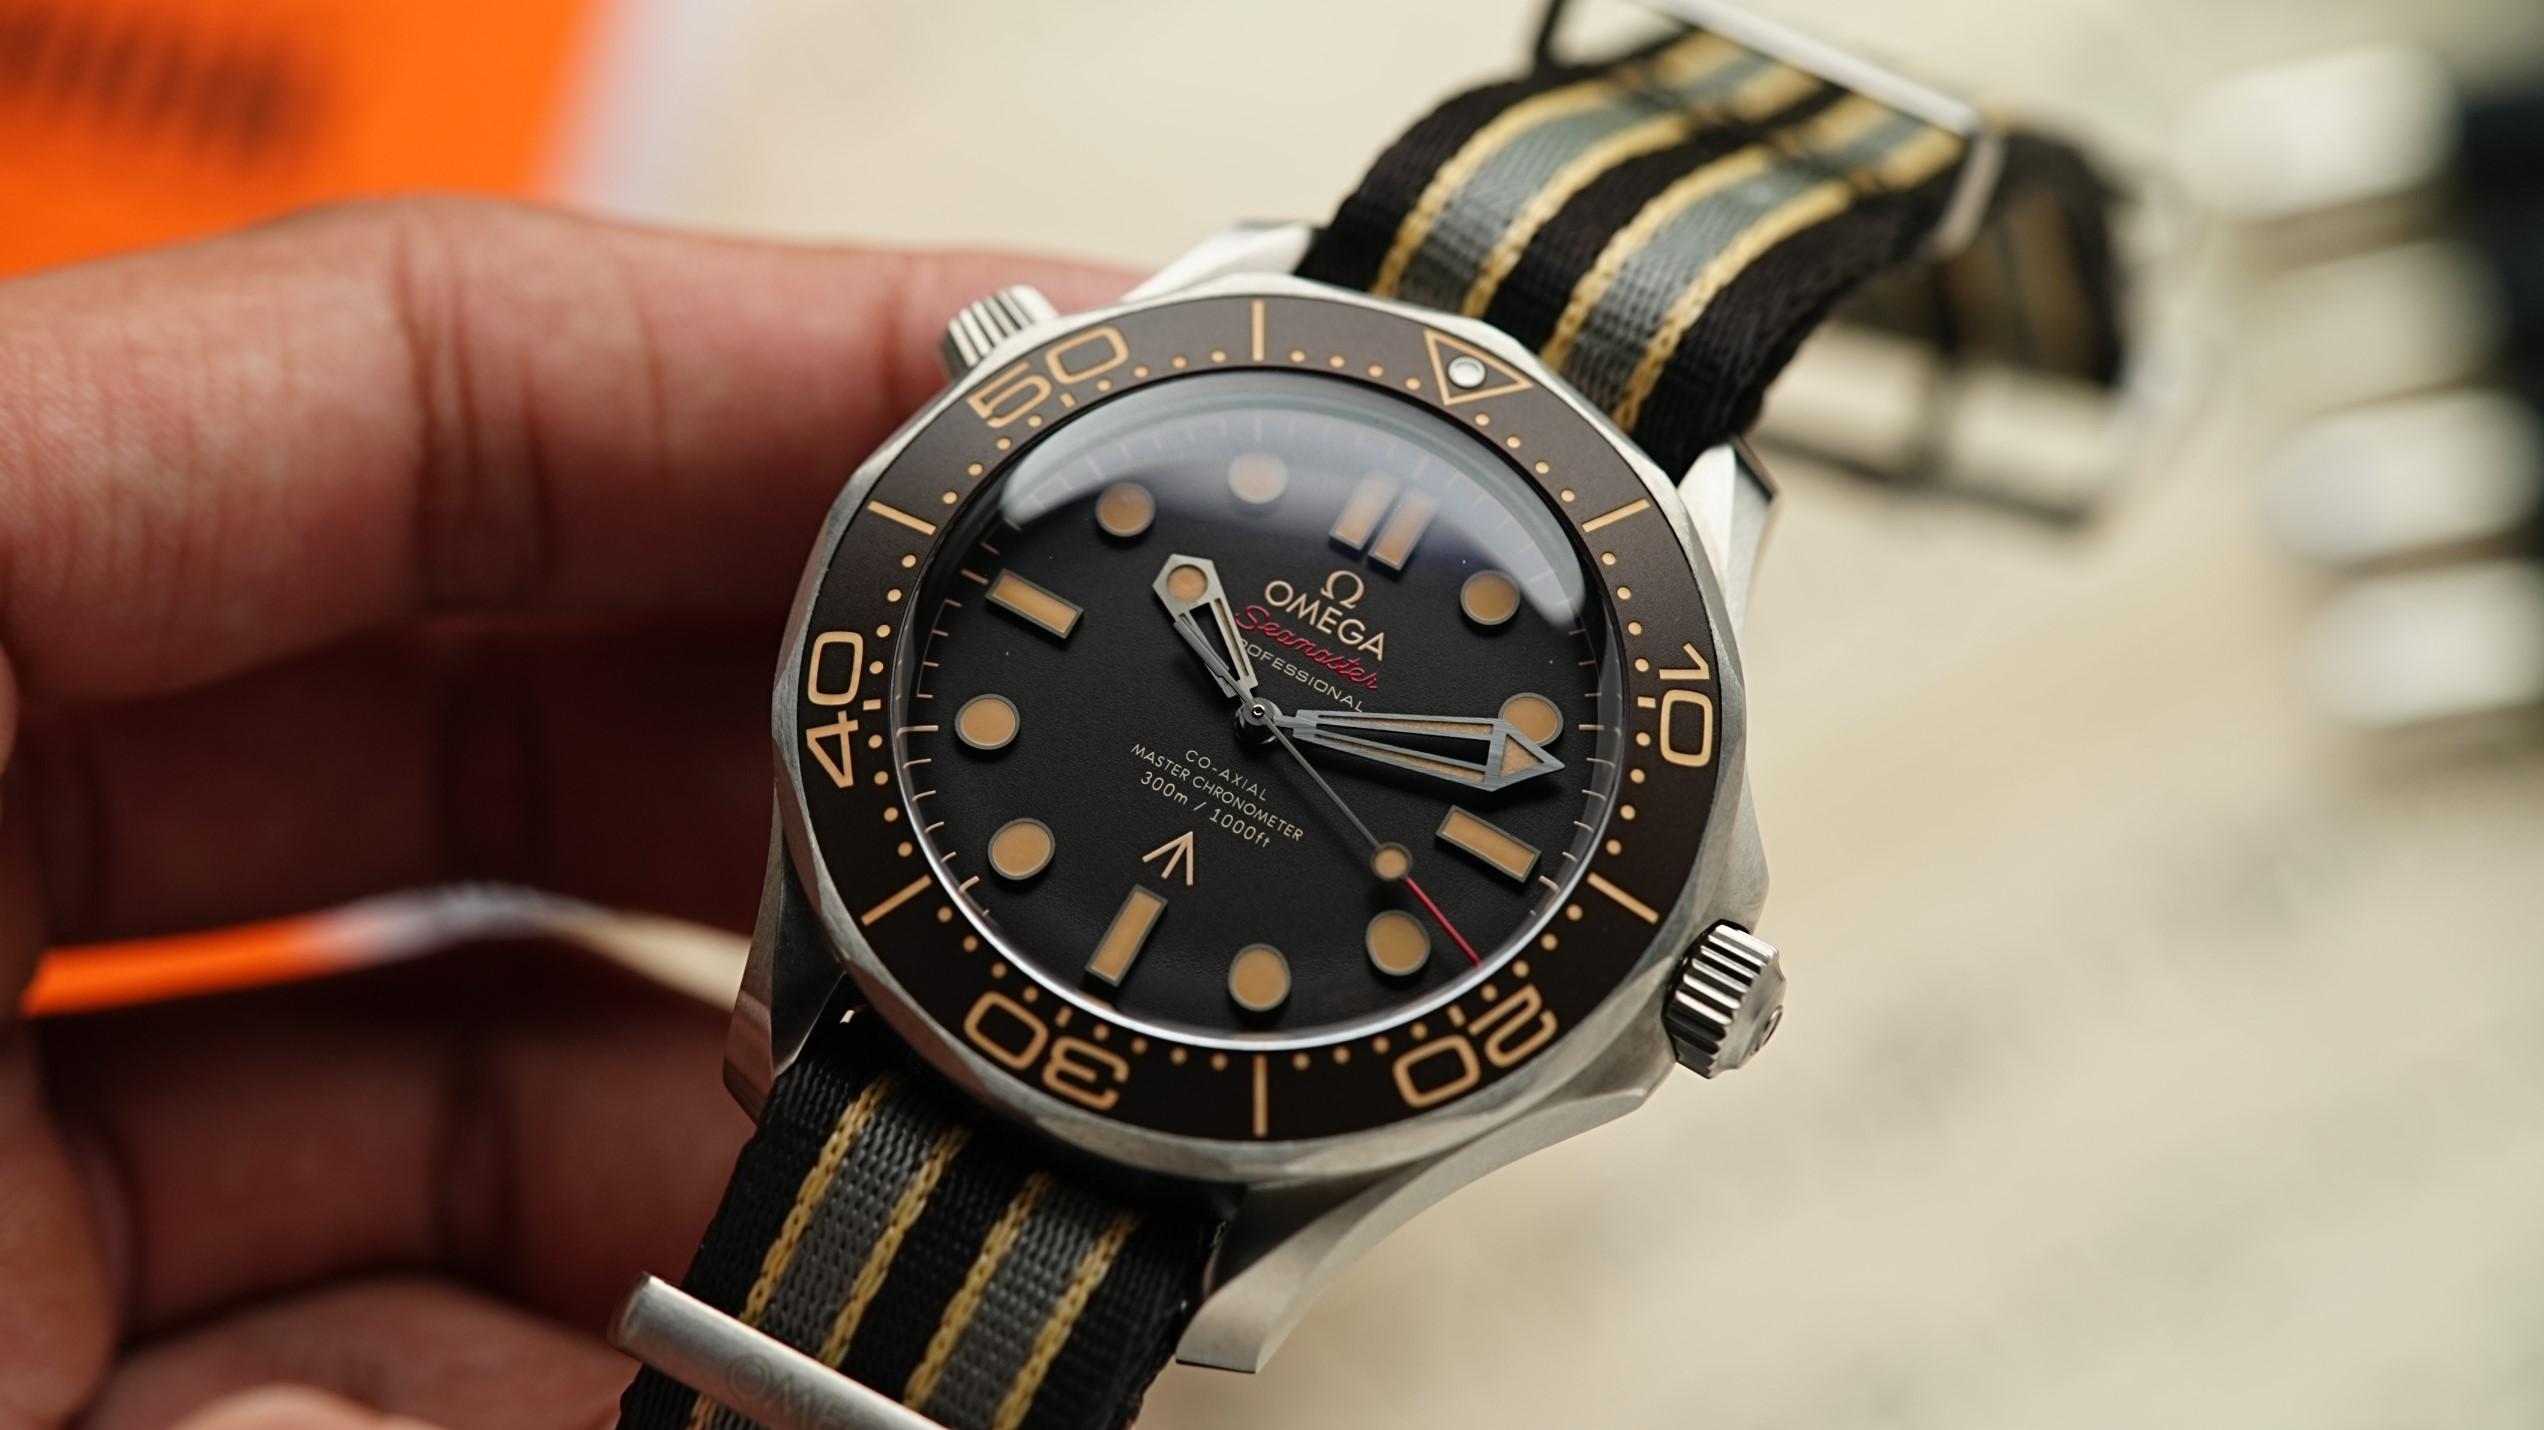 Omega Seamaster Diver 300M 007 held in hand.